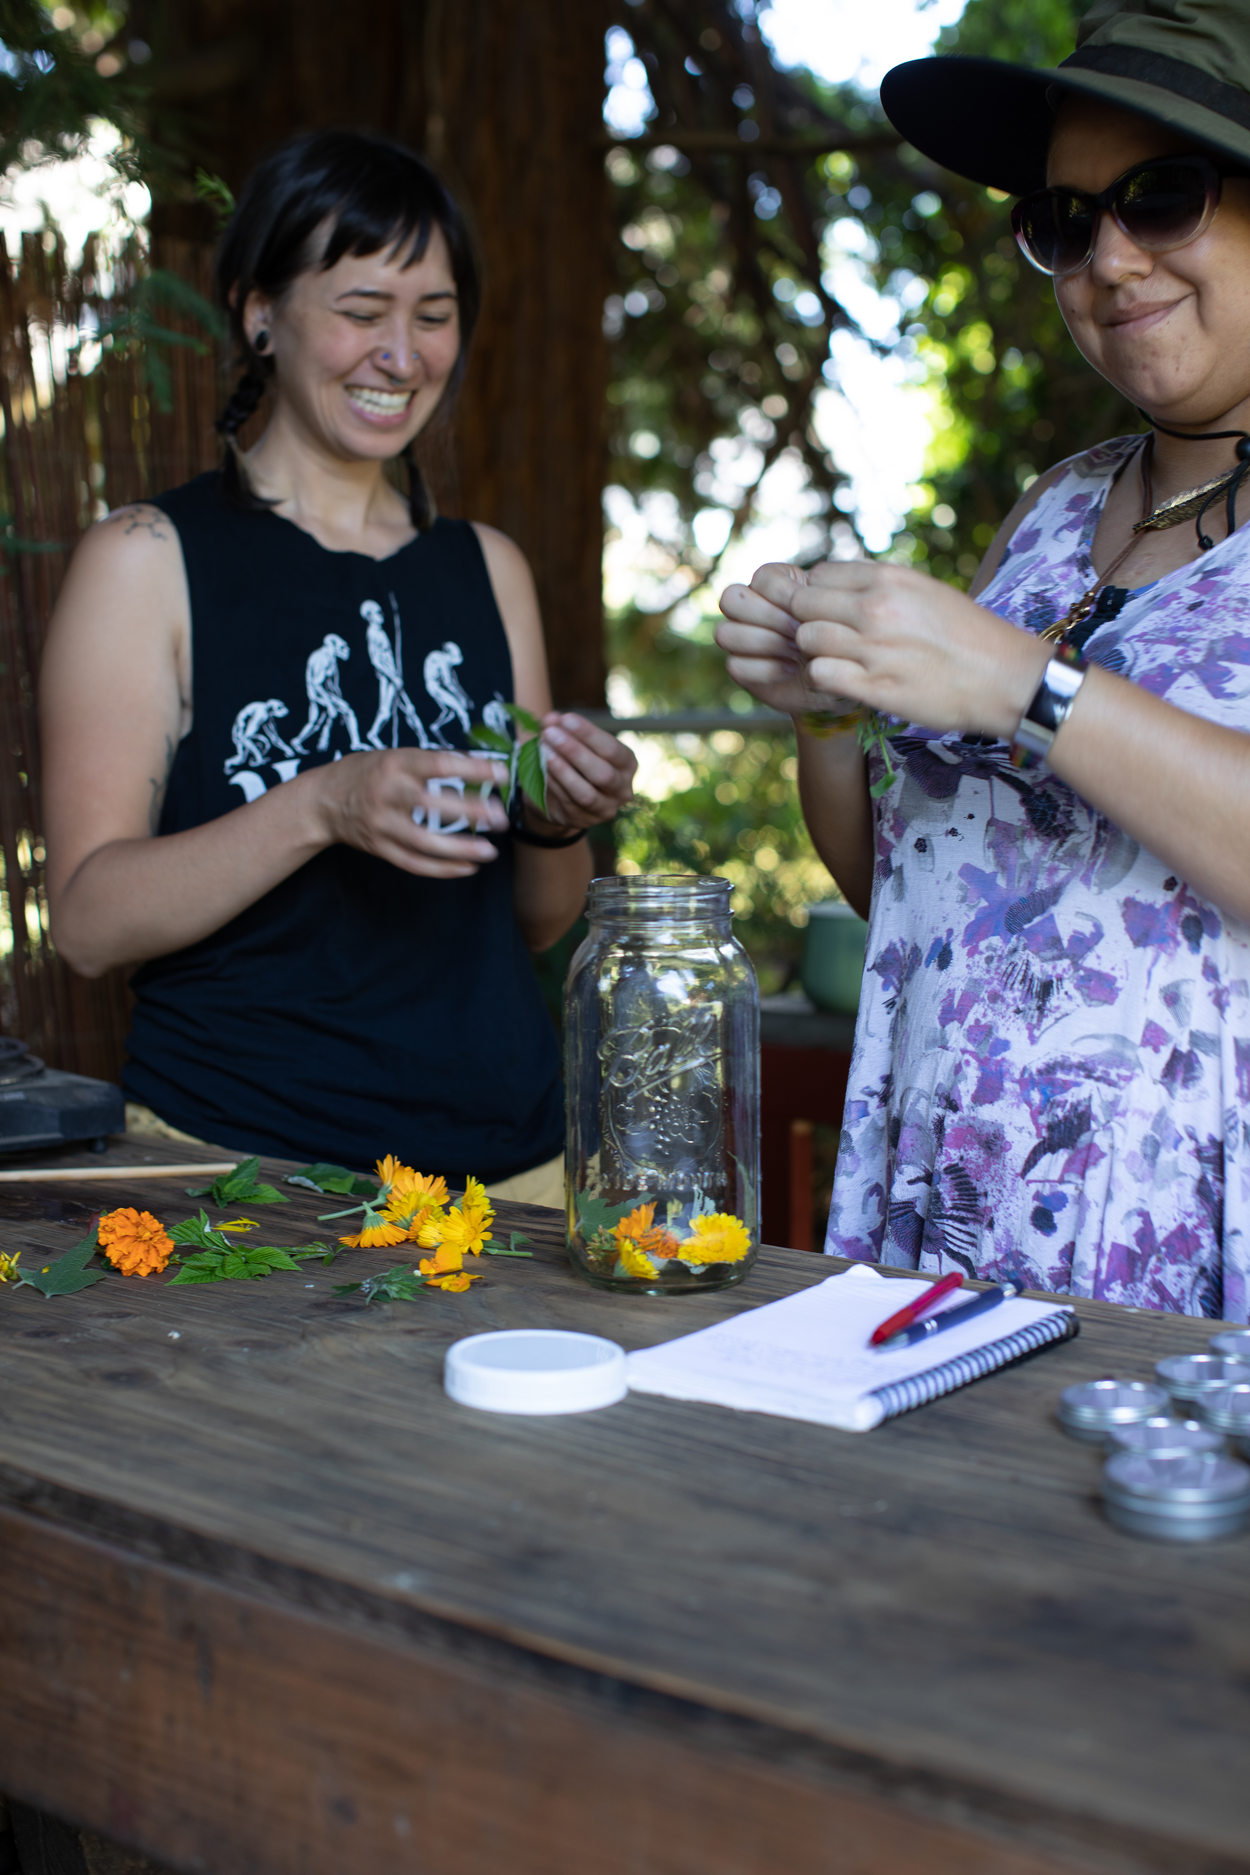 two people who are part of Atabey Medicine stand in front of a wooden table and place bright orange and yellow plants into a mason jar